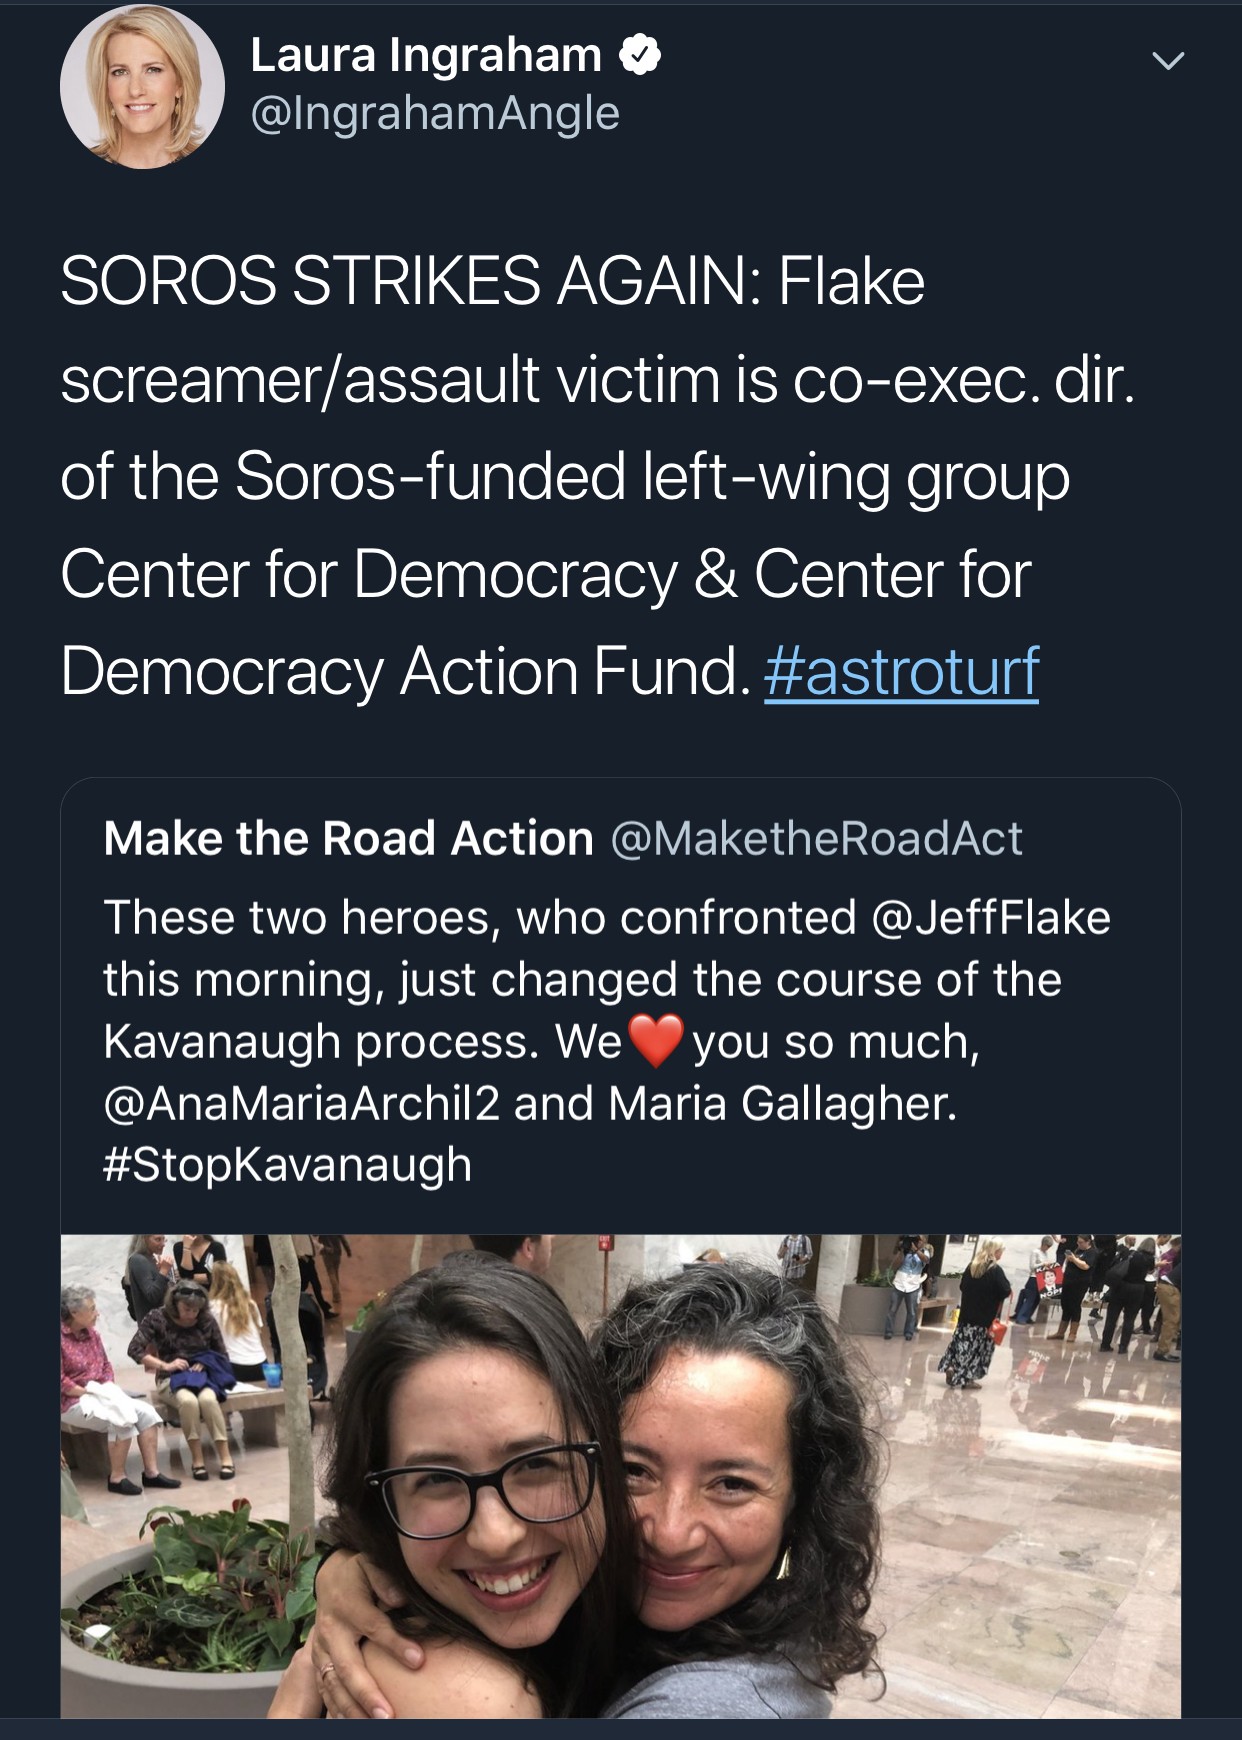 friendship - Laura Ingraham Soros Strikes Again Flake screamerassault victim is coexec. dir. of the Sorosfunded leftwing group Center for Democracy & Center for Democracy Action Fund. Make the Road Action These two heroes, who confronted this morning, jus